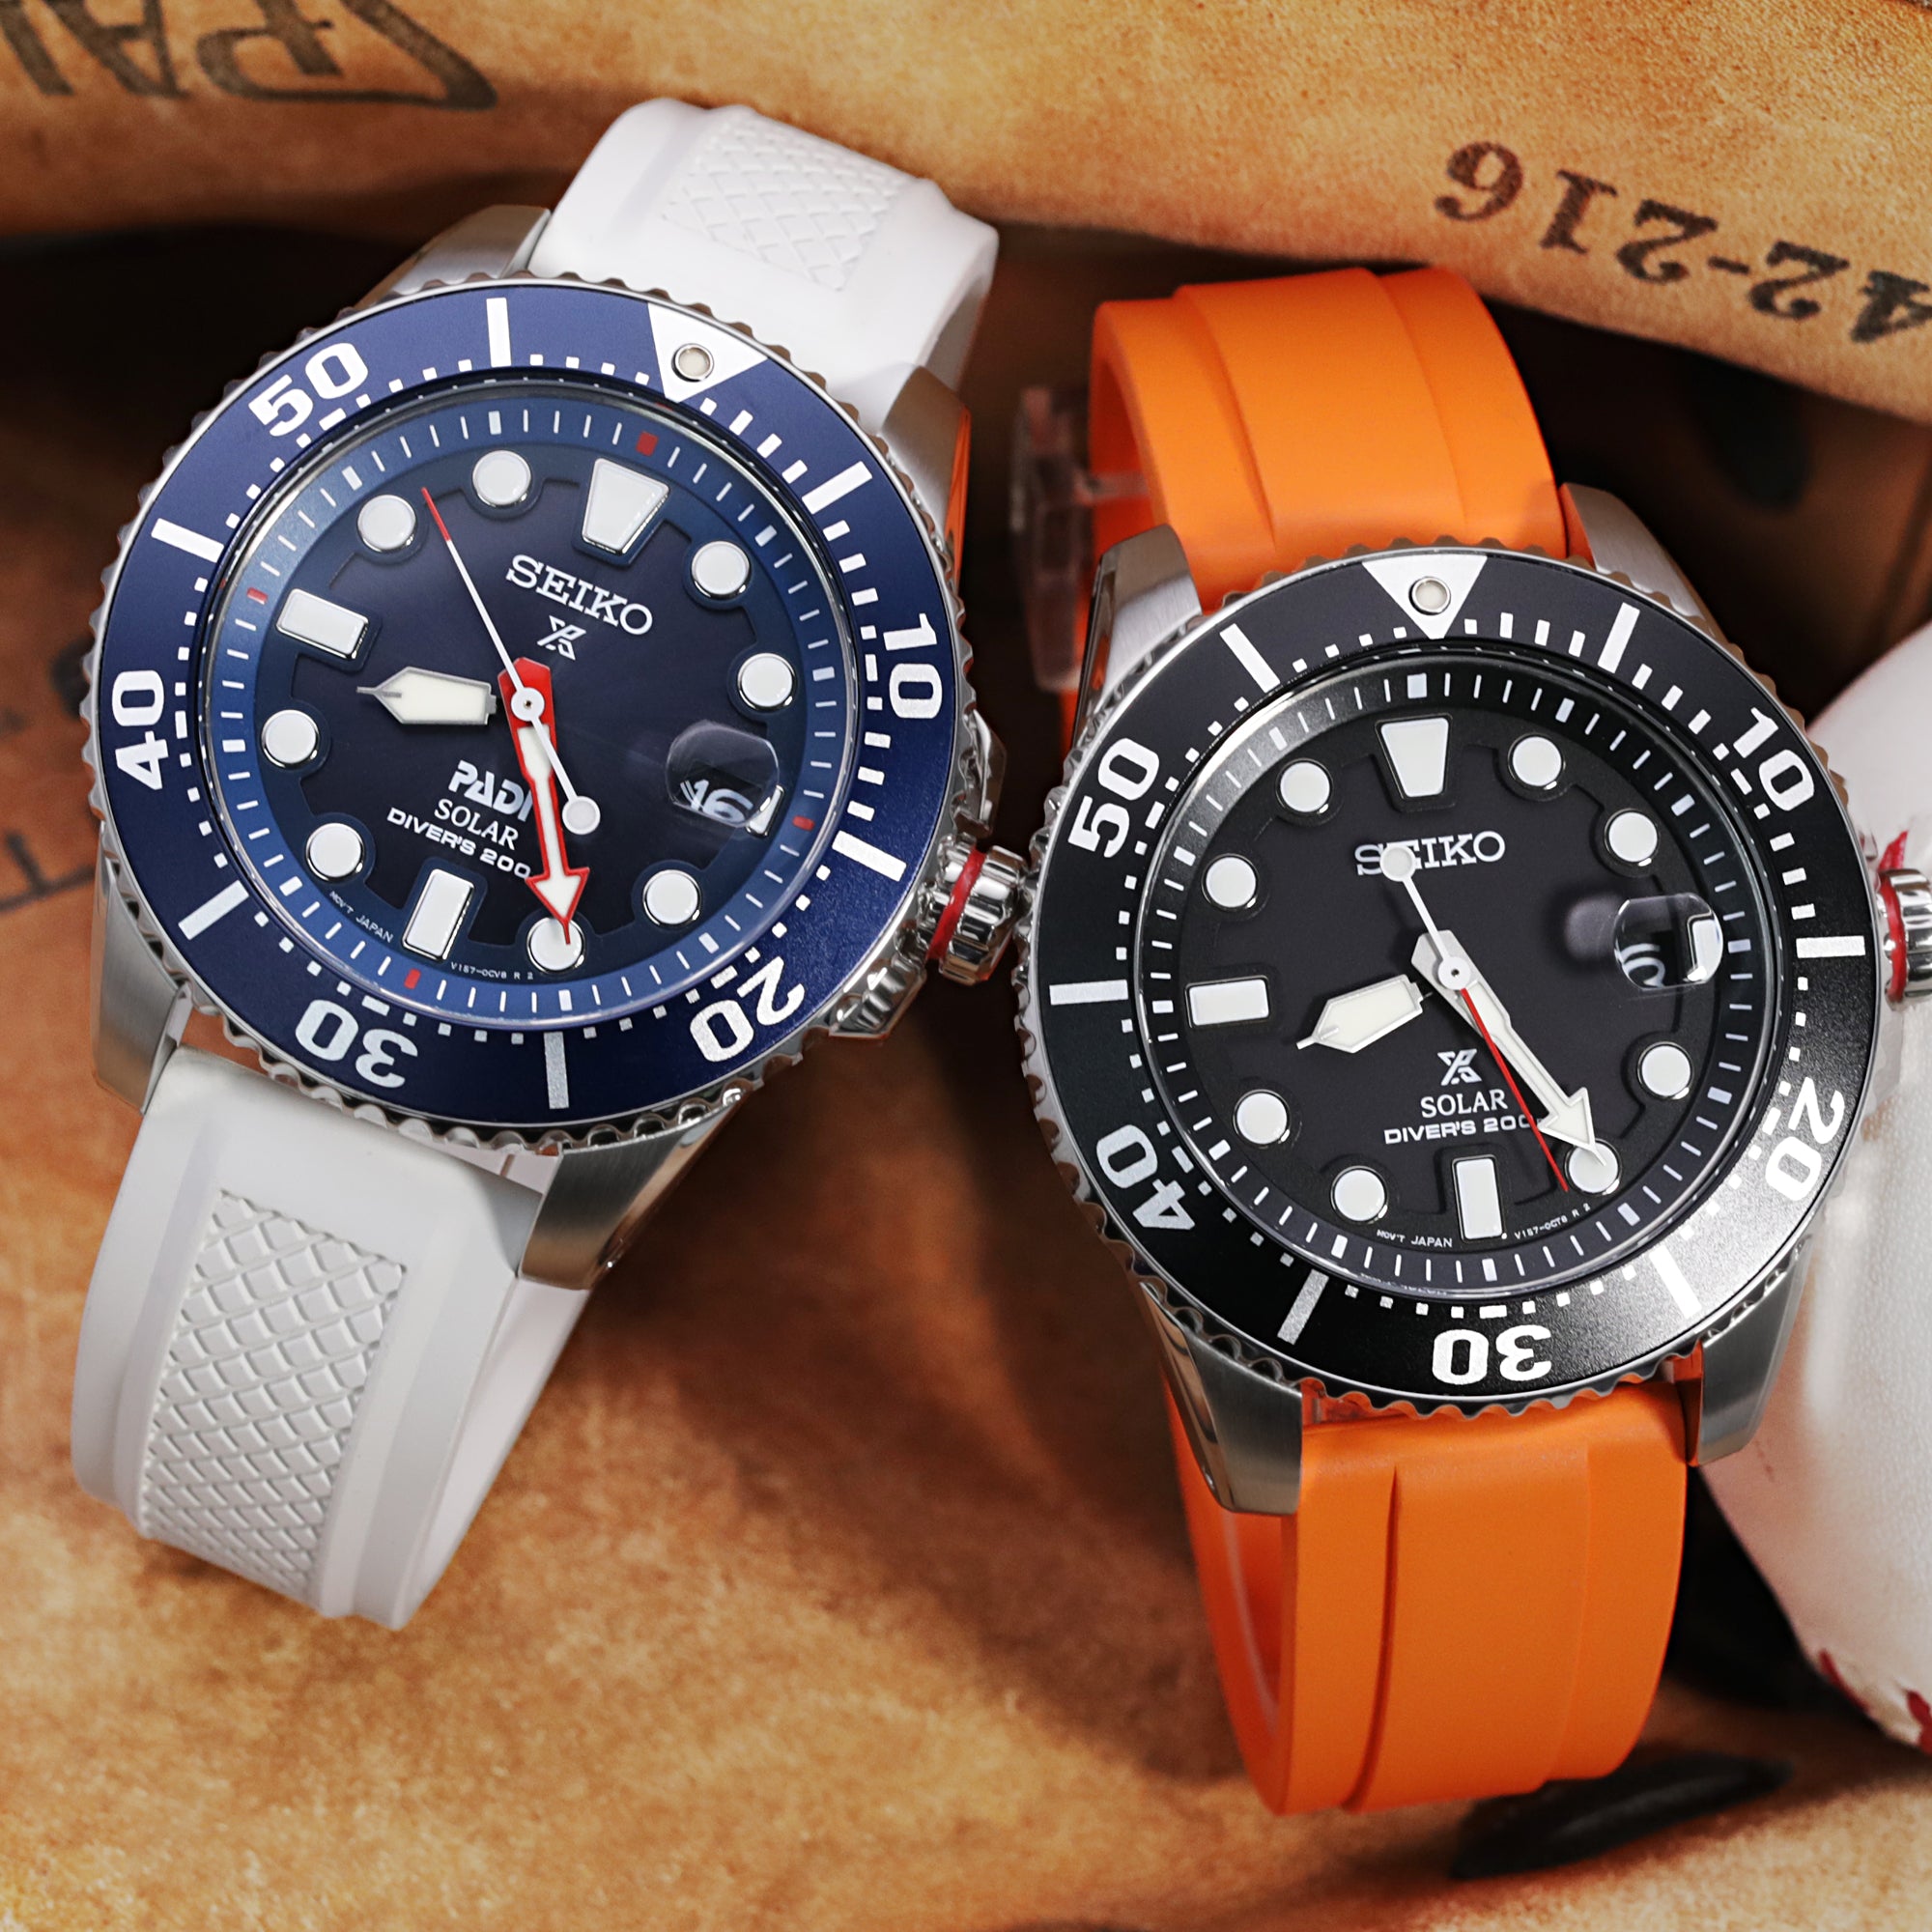 Two creations presented on a new type of fabric strap made especially for  Prospex diver's watches.